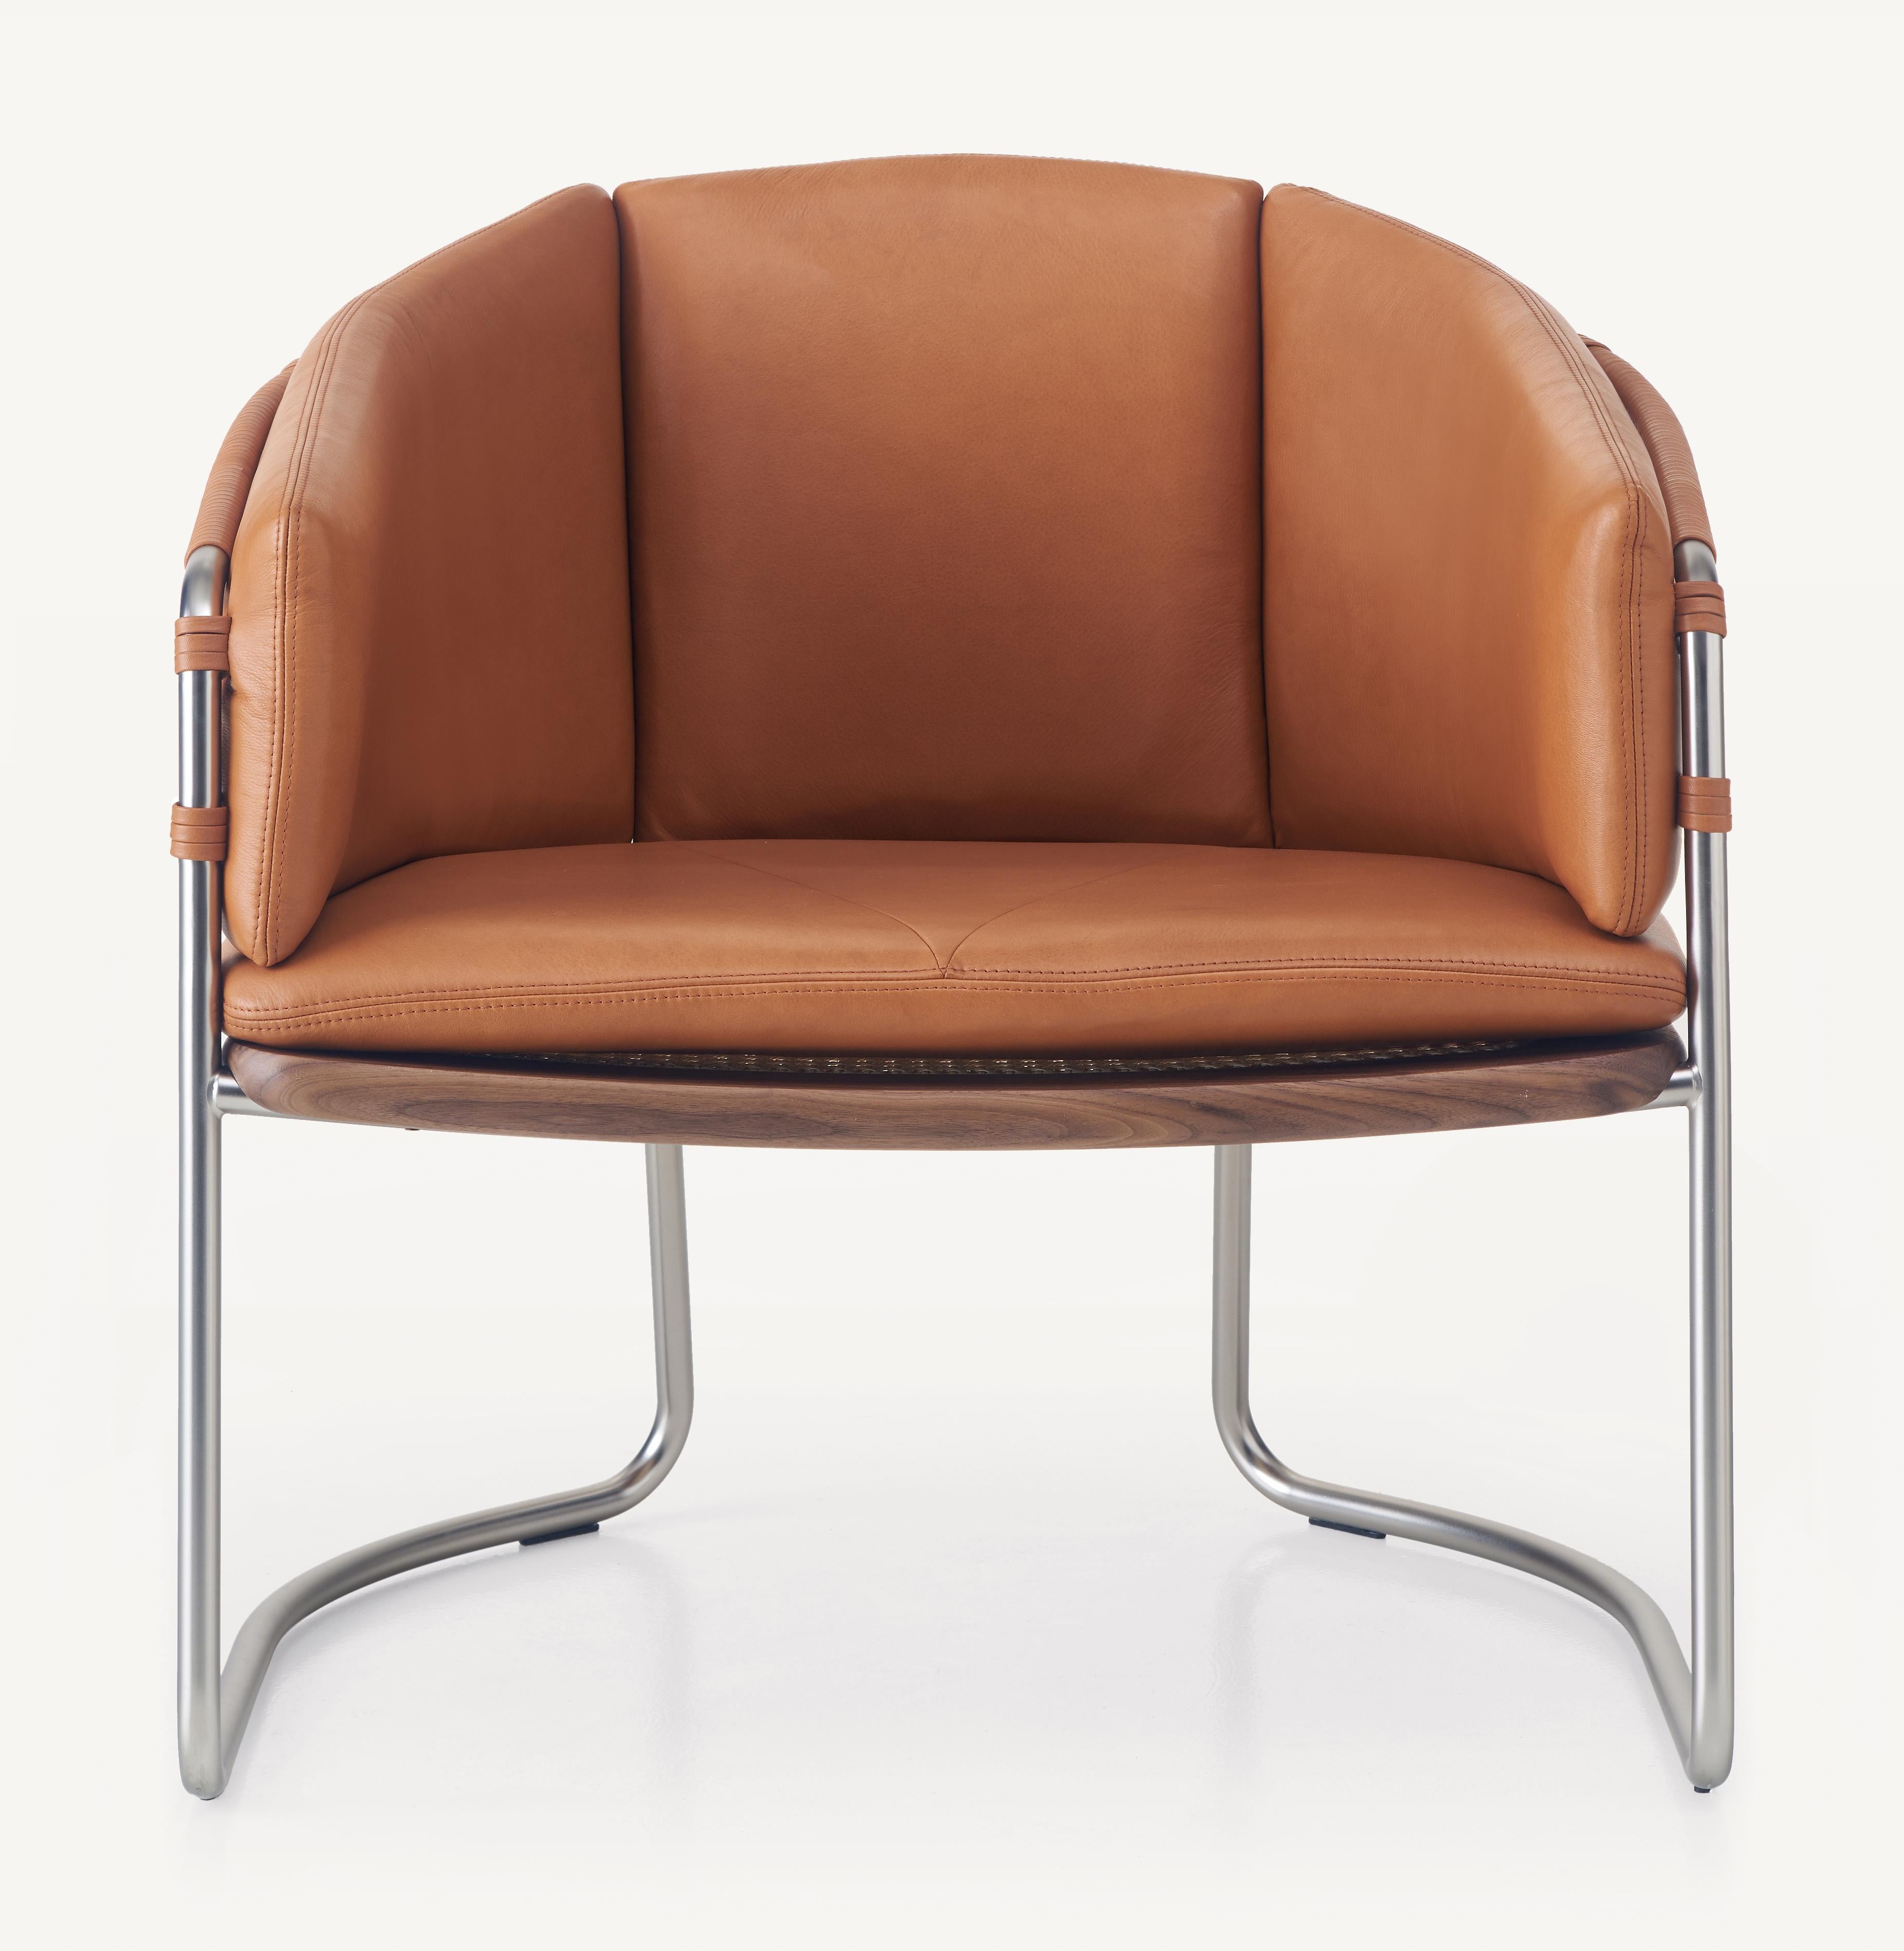 For Sale: Brown (Elegant 43807 British Tan) Geometric Lounge Chair in Walnut, Satin Nickel and Leather by Craig Bassam 3